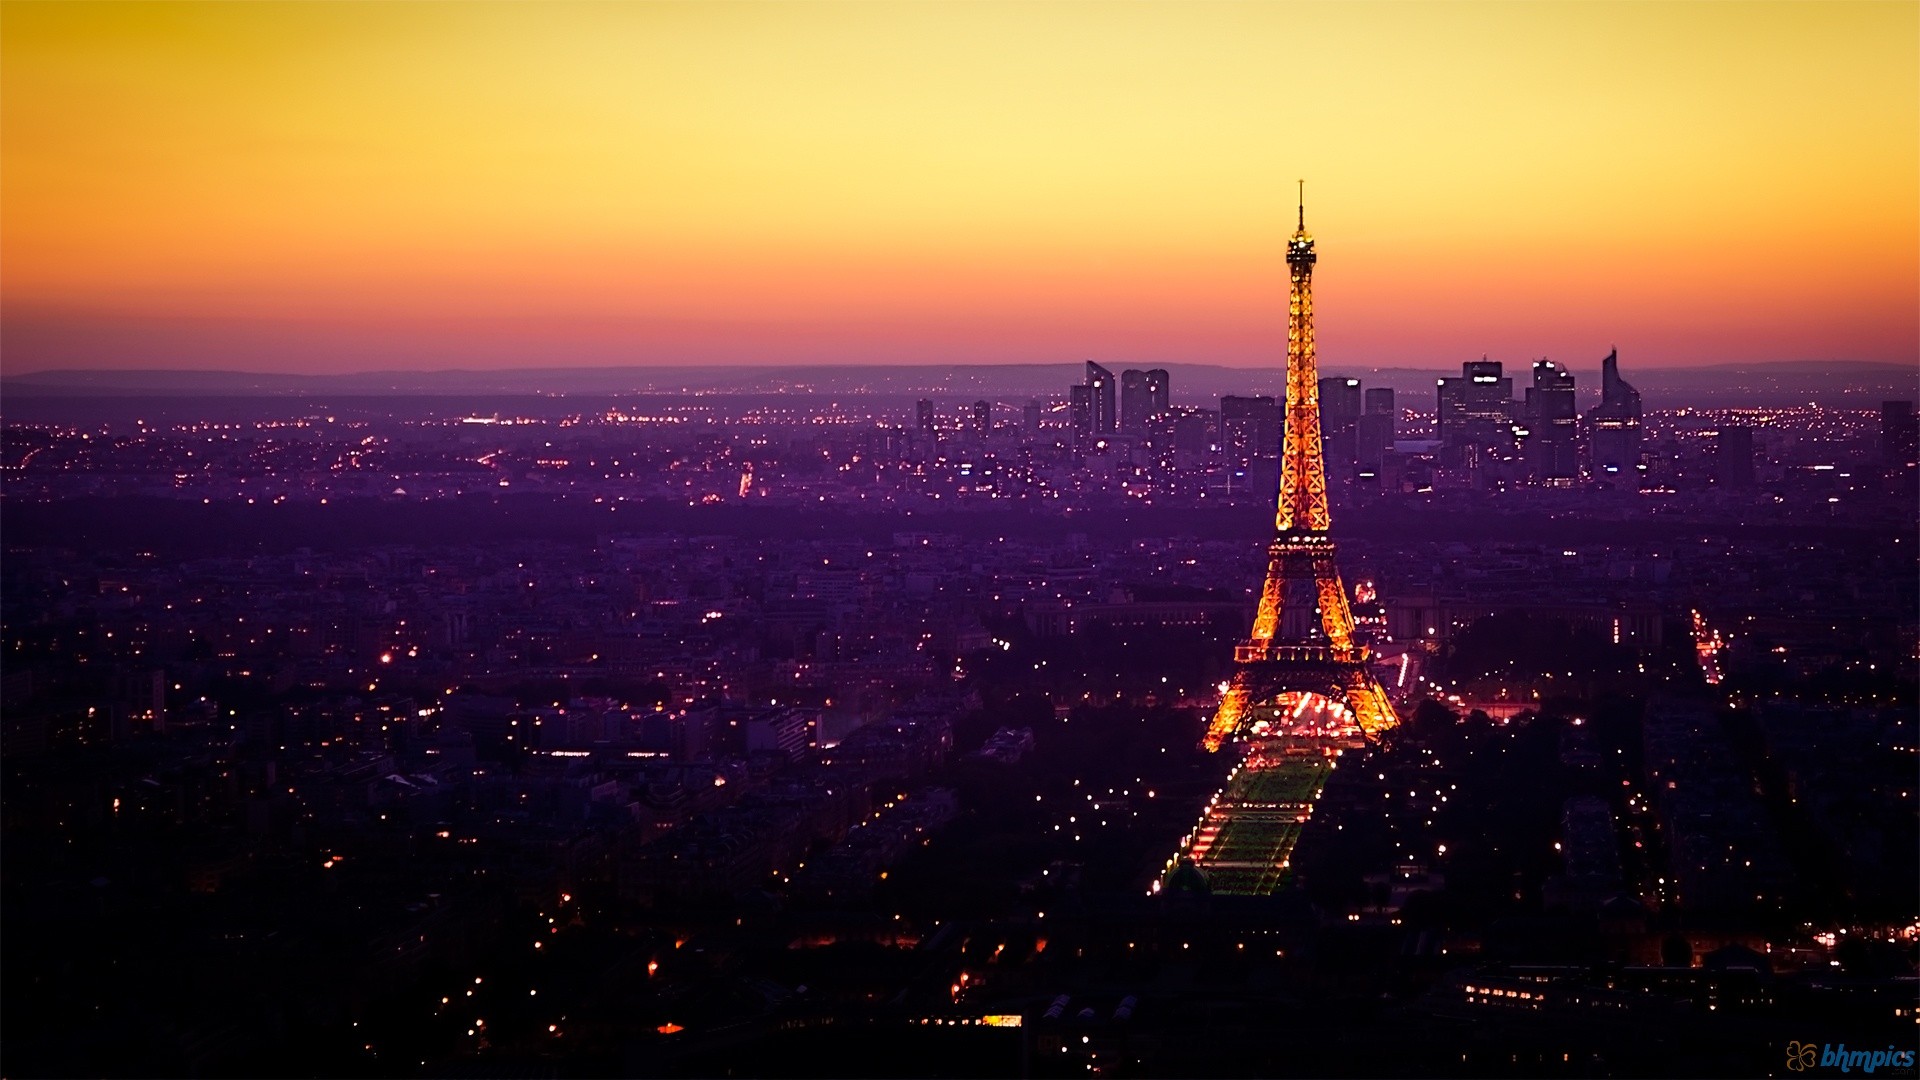 Eiffel tower and Paris at Night looks incredible